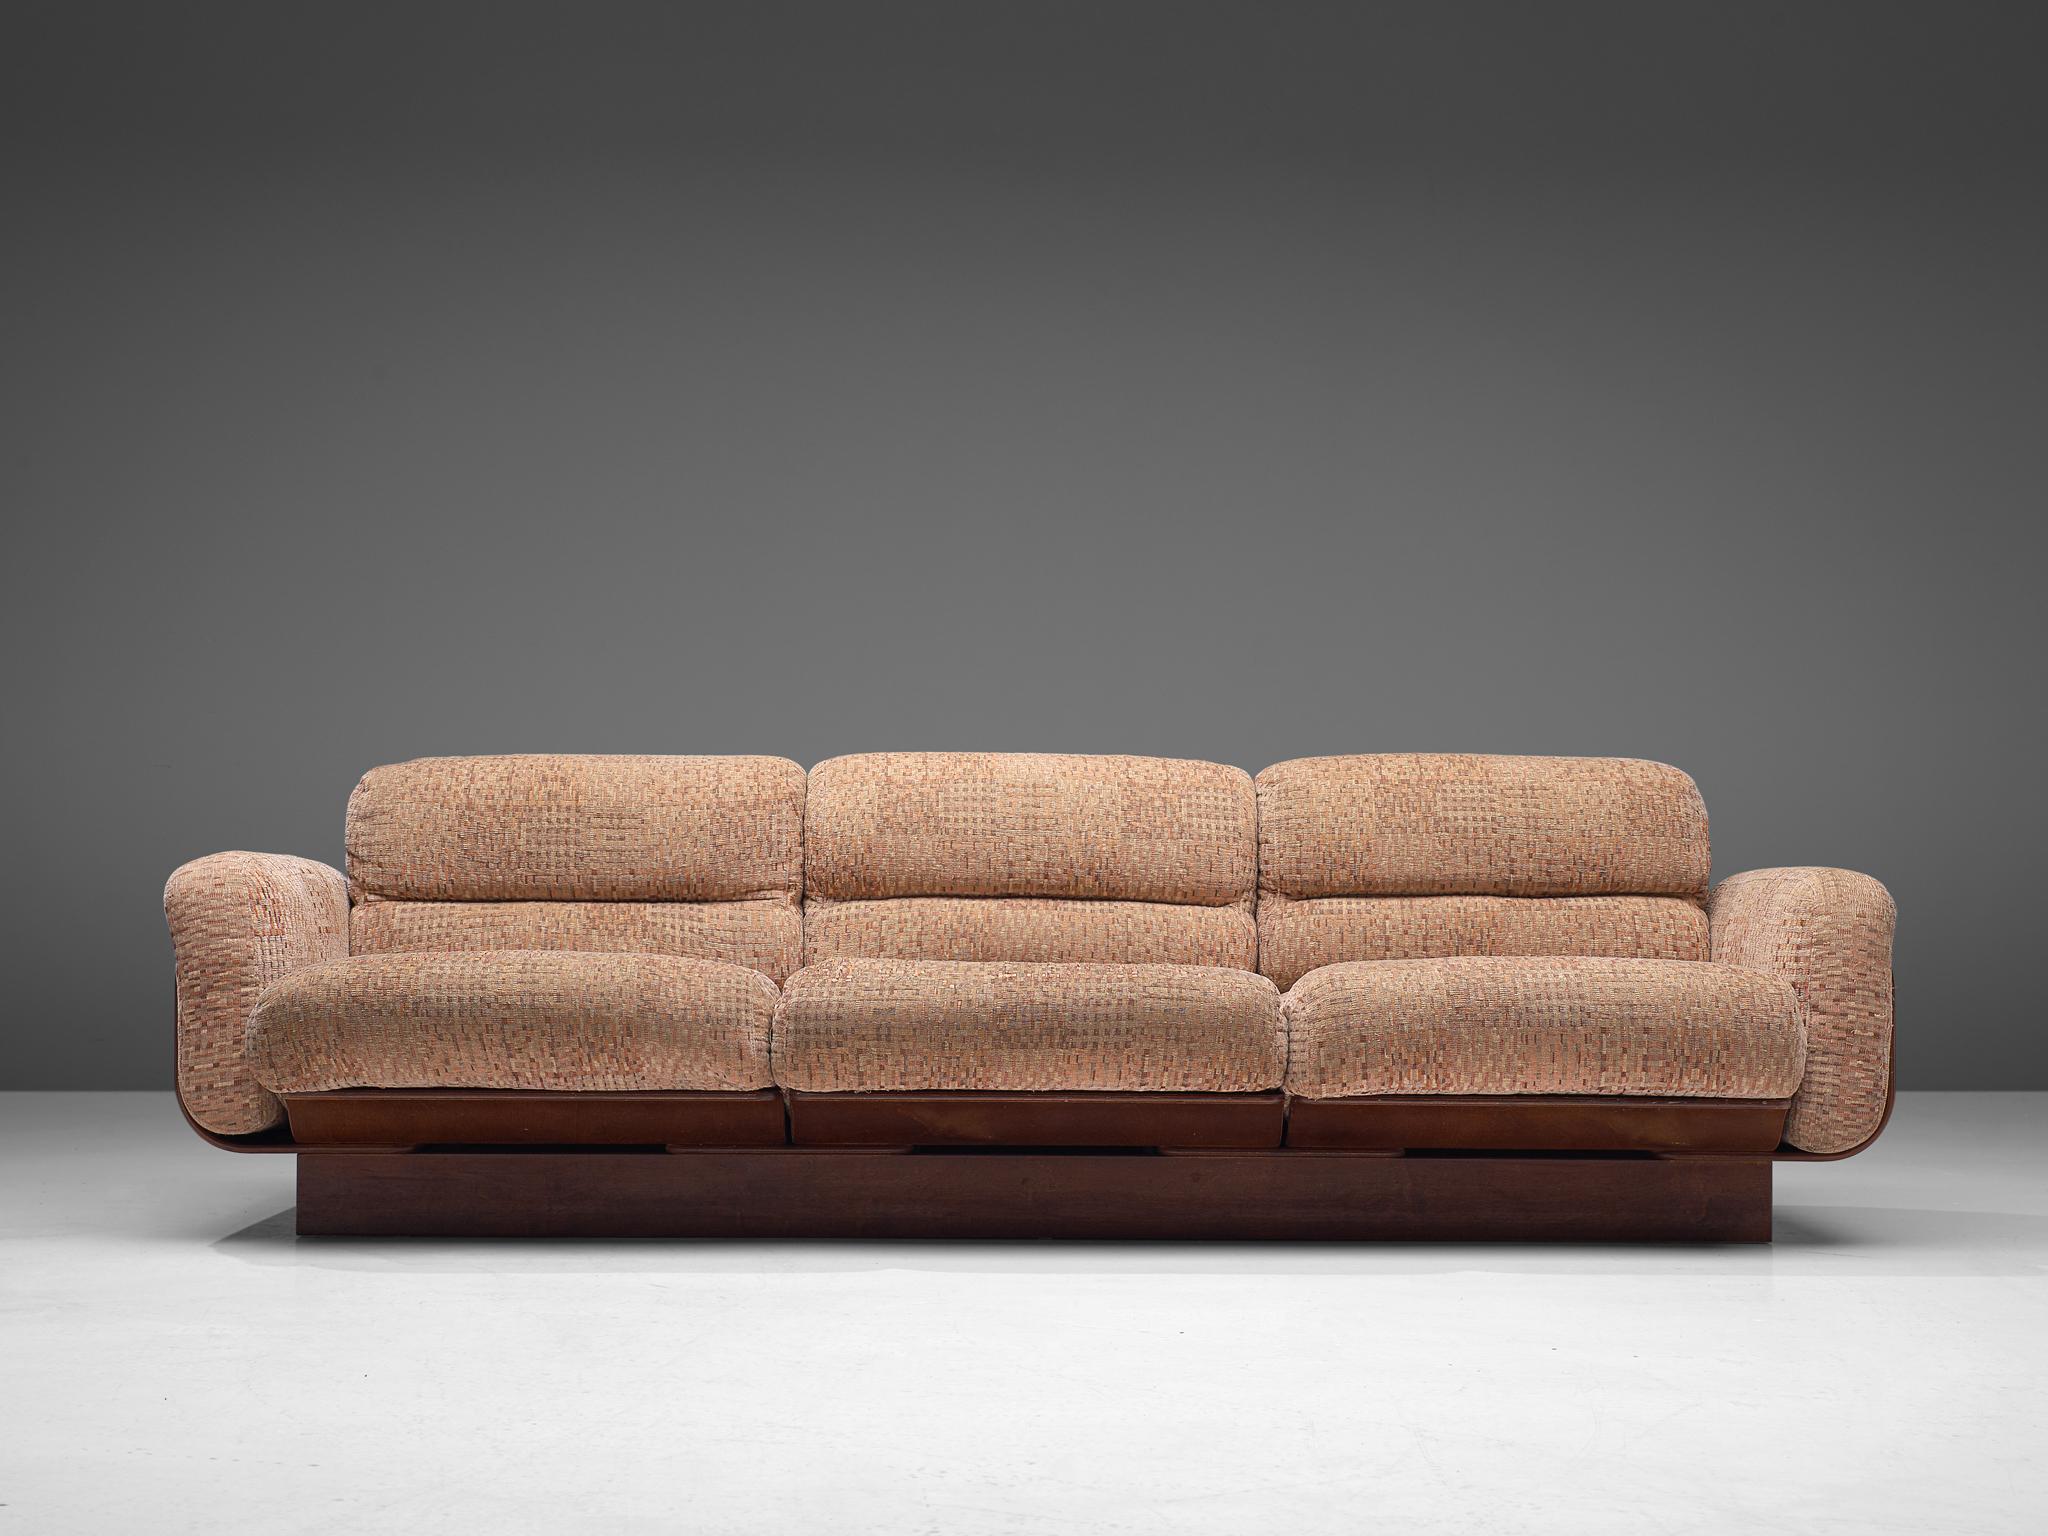 Asko, three-seat sofa, teak and upholstery, Finland, 1960s

Bulky three-seat basket sofa in teak that functions as the shell that keeps cushions in their position. The base is solid and gives the appearance of a seat that flows. The loose cushions